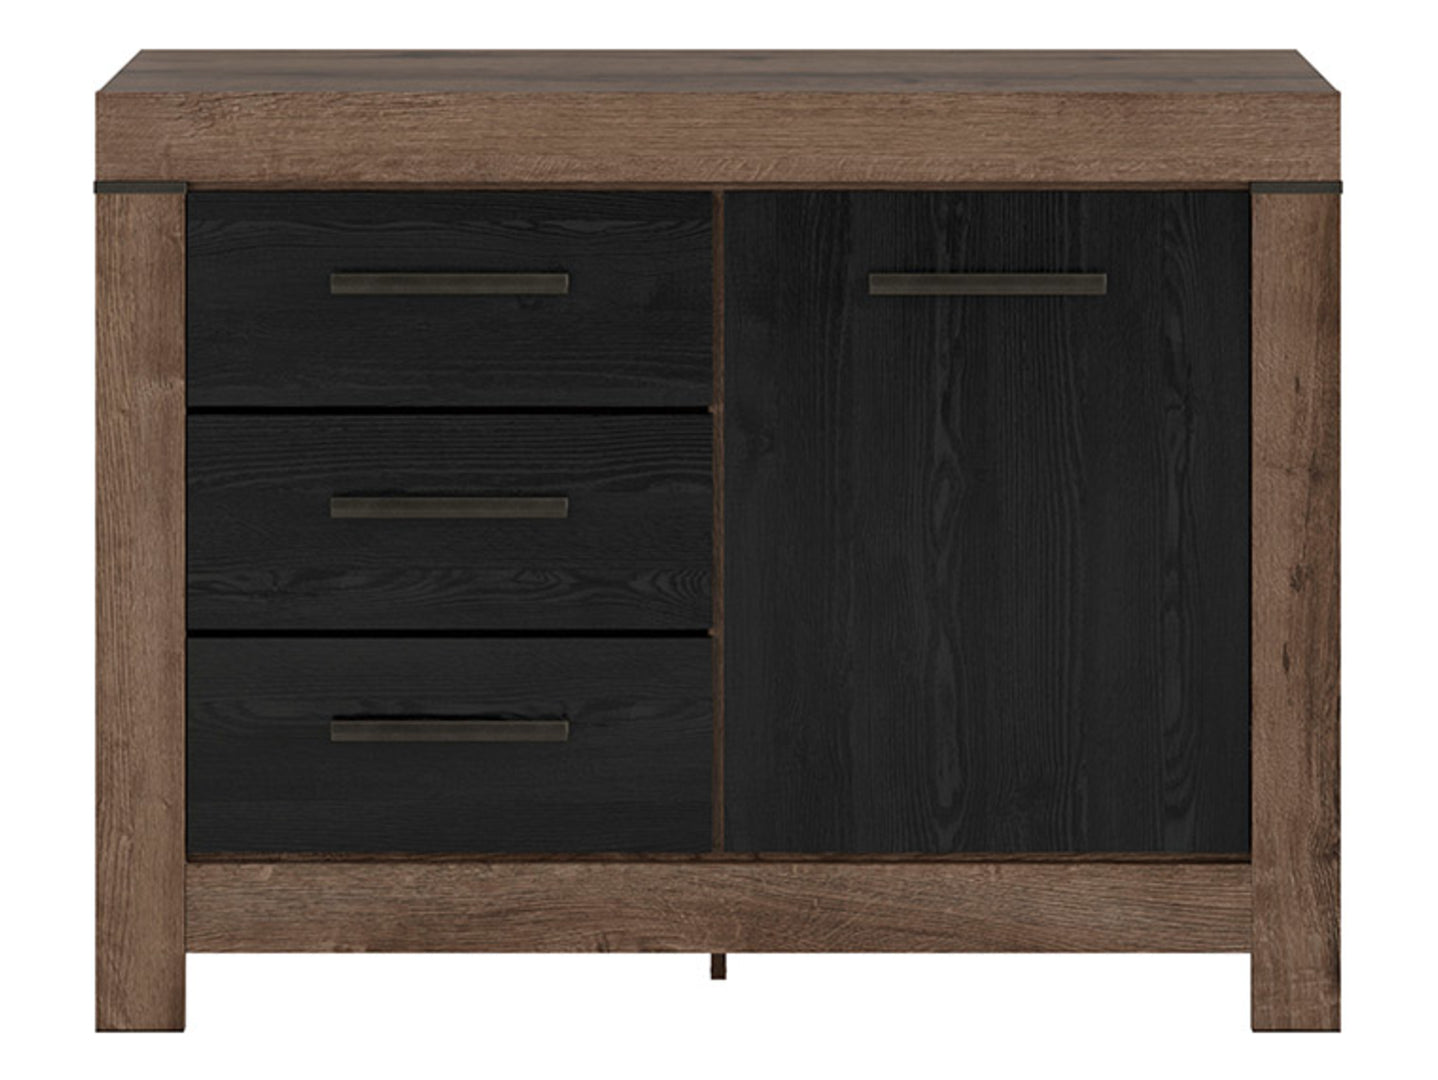 BALIN Chest of drawers KOM1D3S